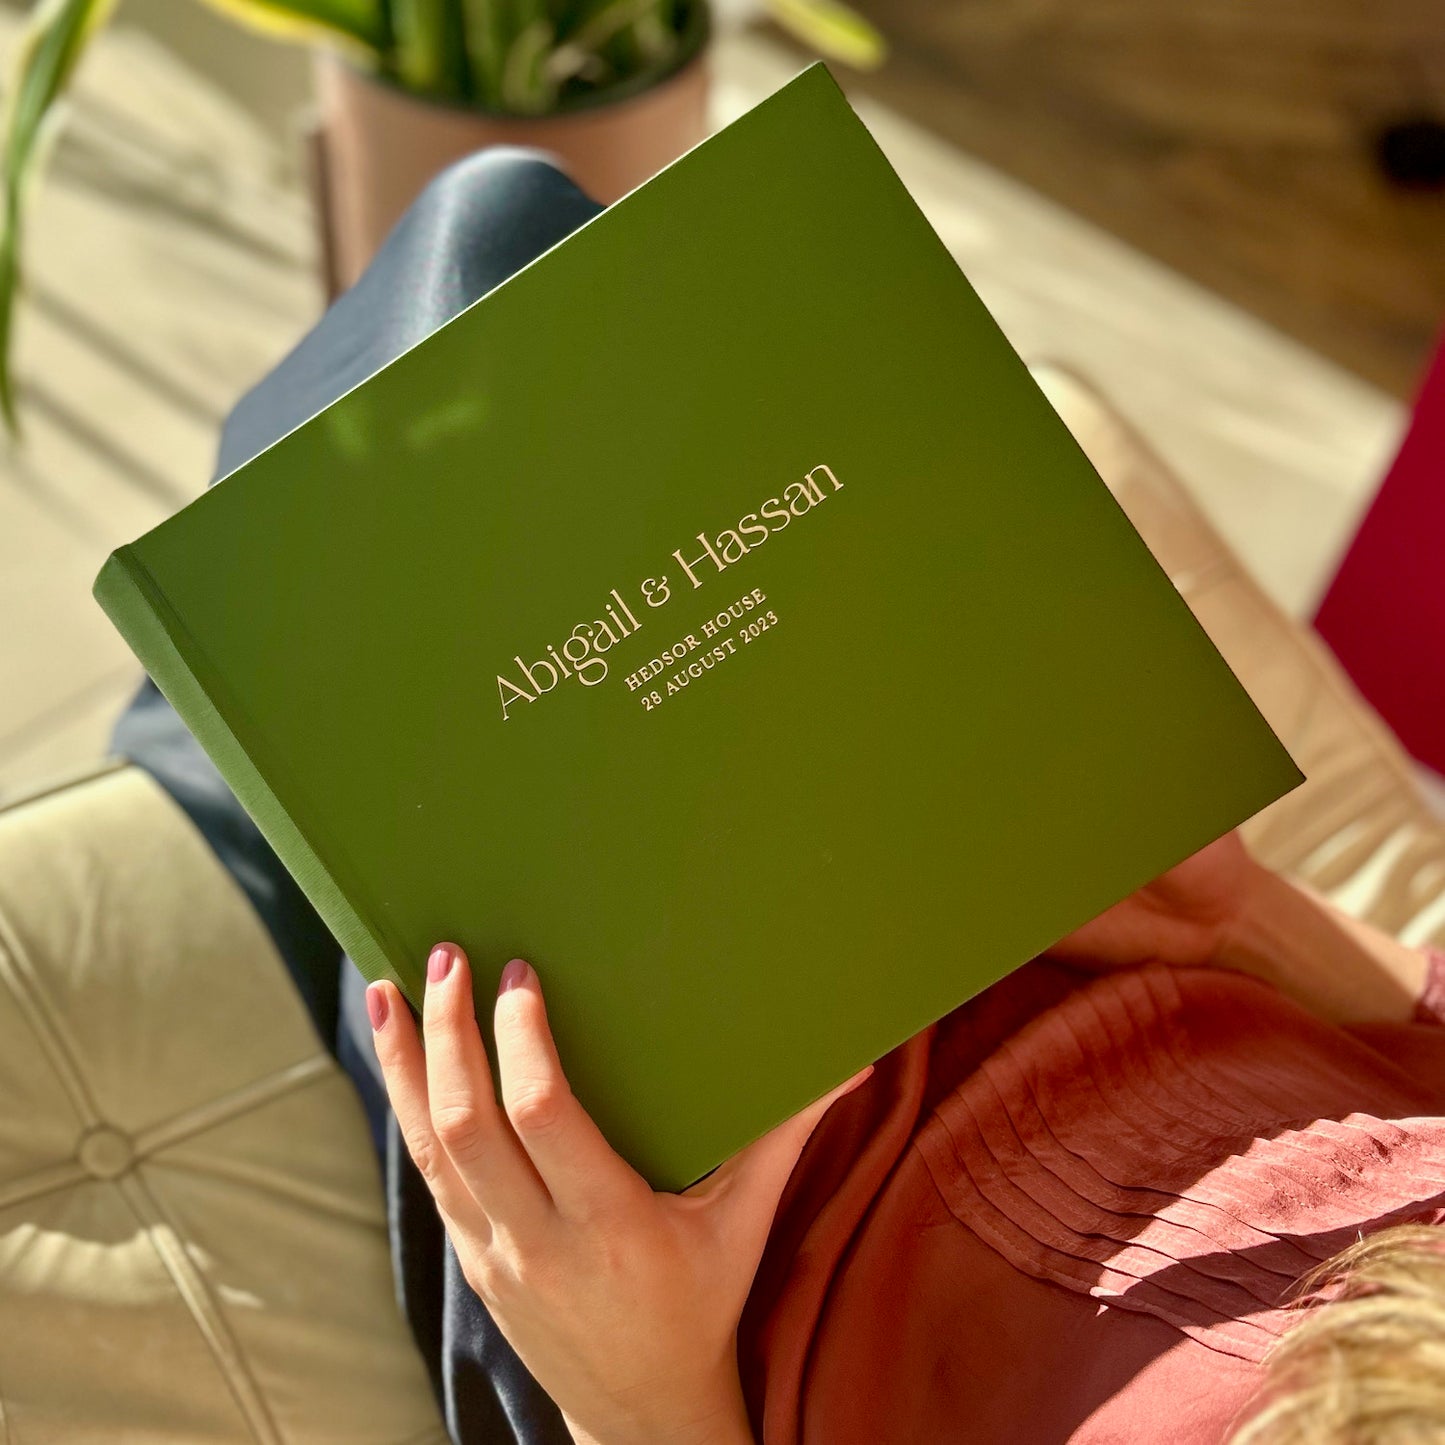 a green wedding guest book is held in a young woman's hand as she sits on a sofa. The wedding guest book has golld writing on the front and details of a wedding 